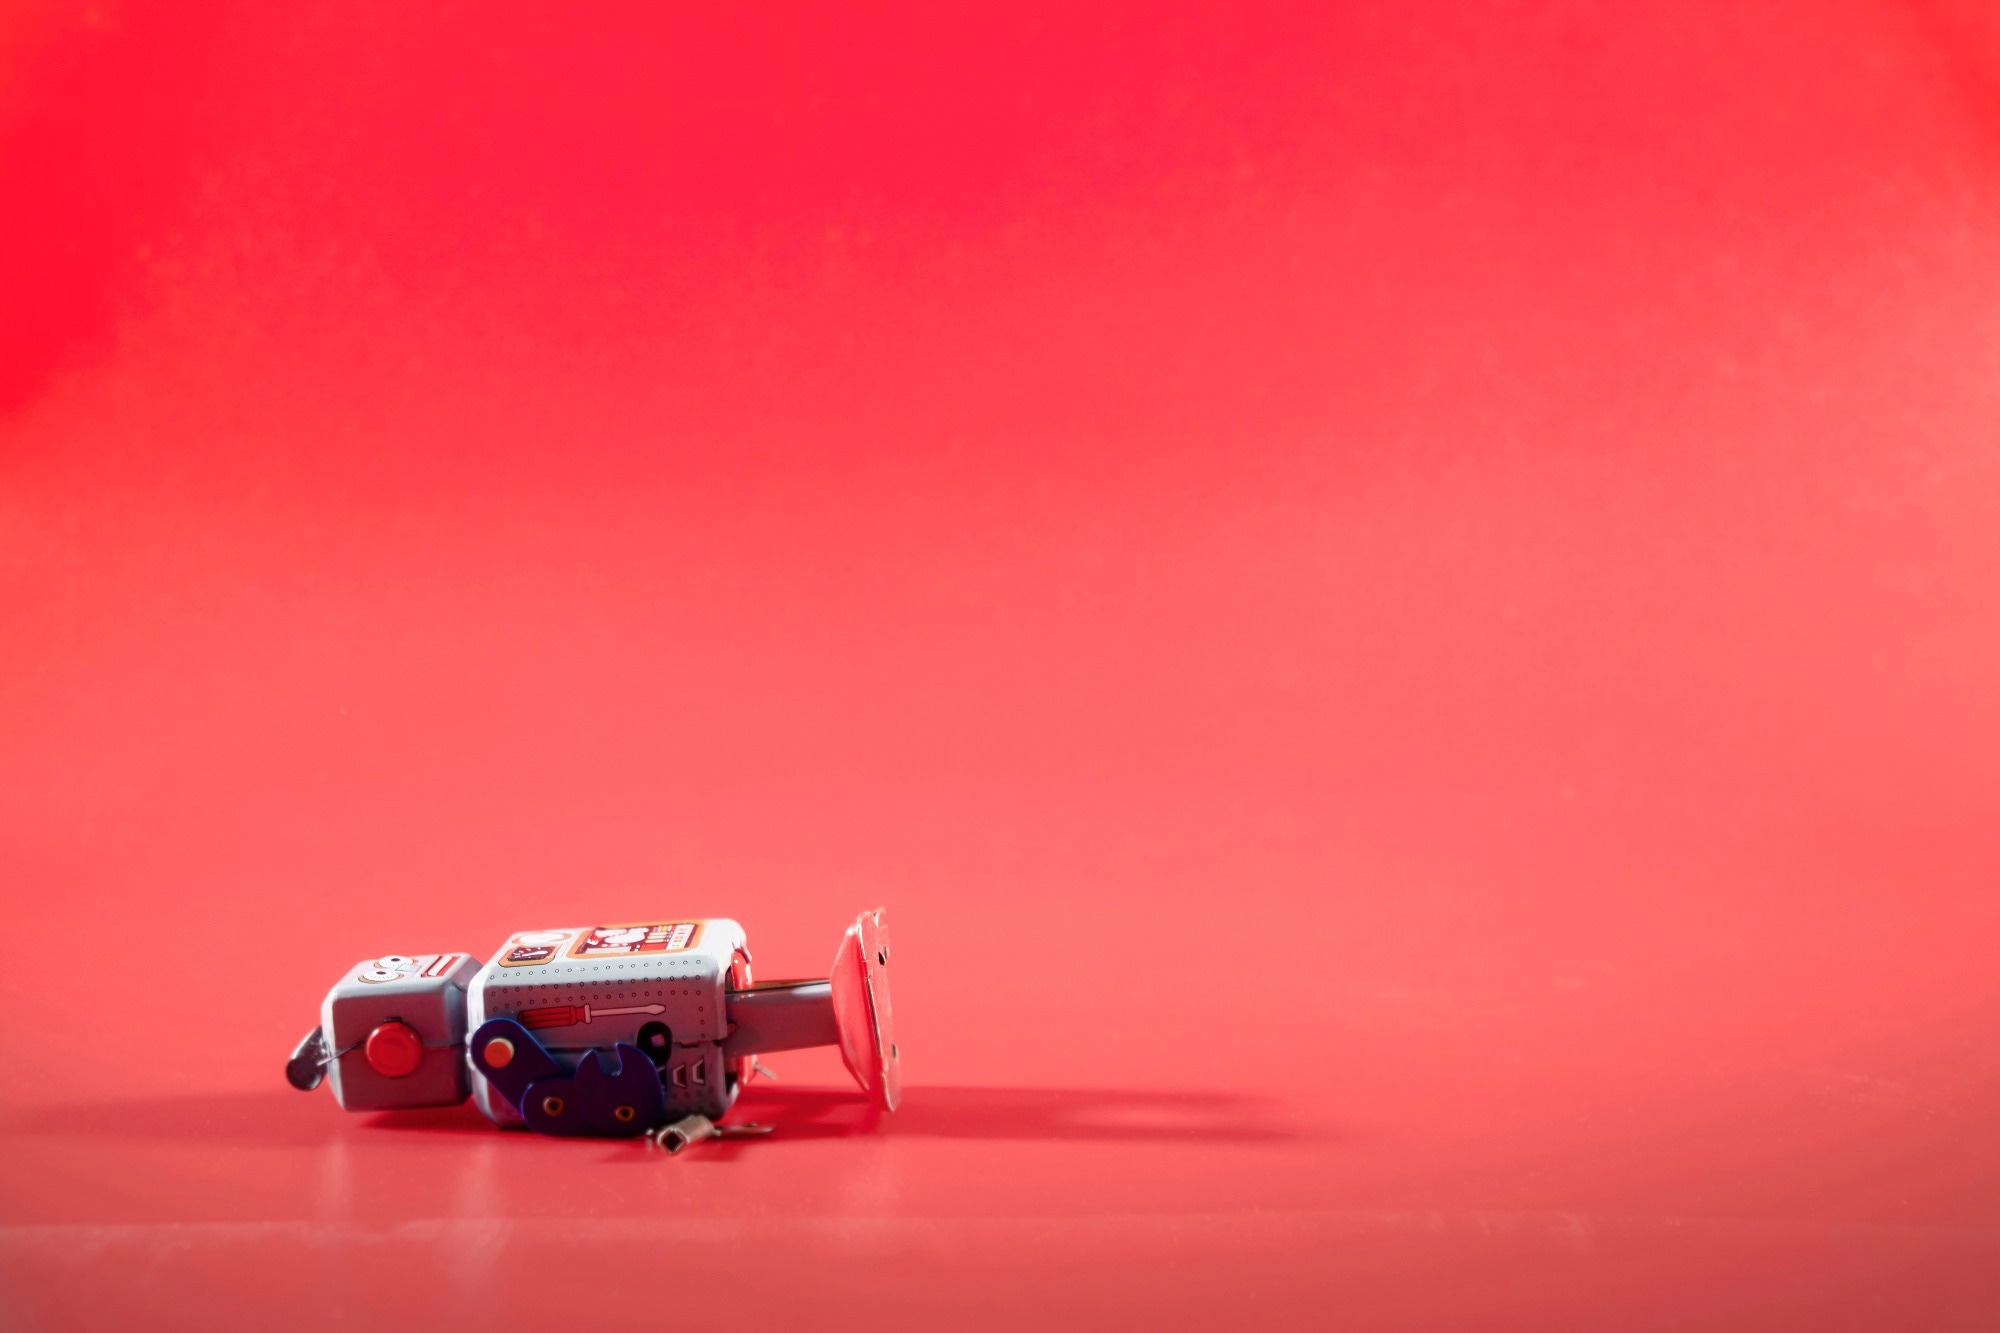 A Guide to Miniature Robots and their Applications